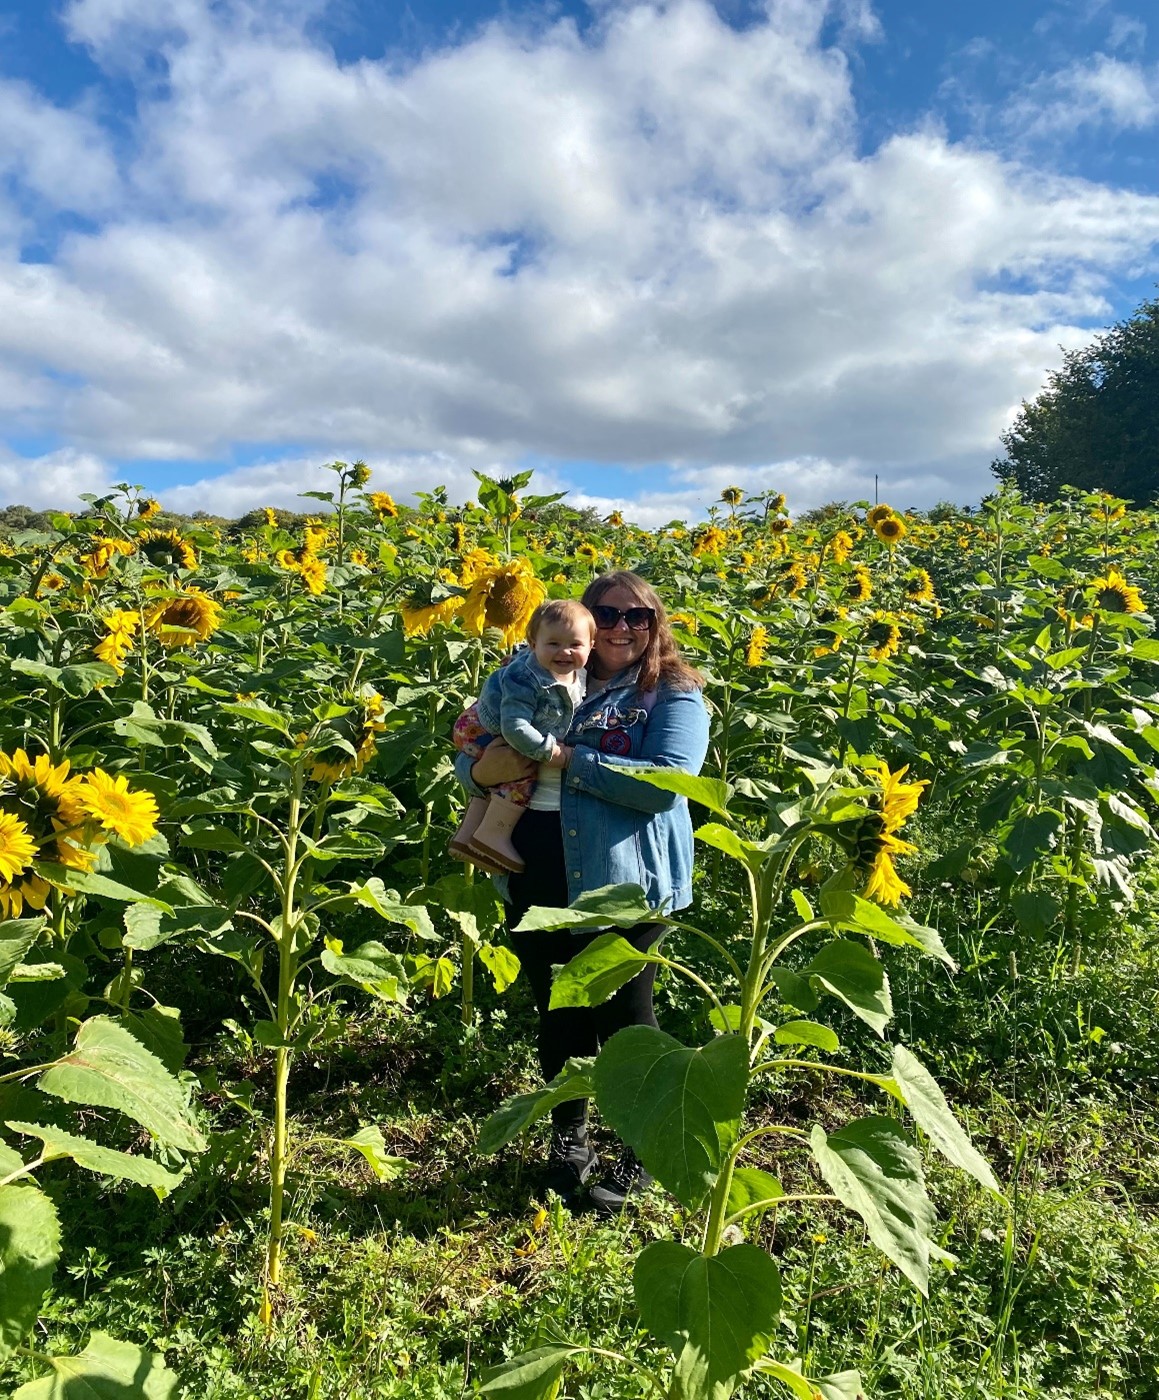 Photograph of Leigh Miele, Training Co-Ordinator for Employability at UHI Moray, standing in a sunflower field and holding her daughter